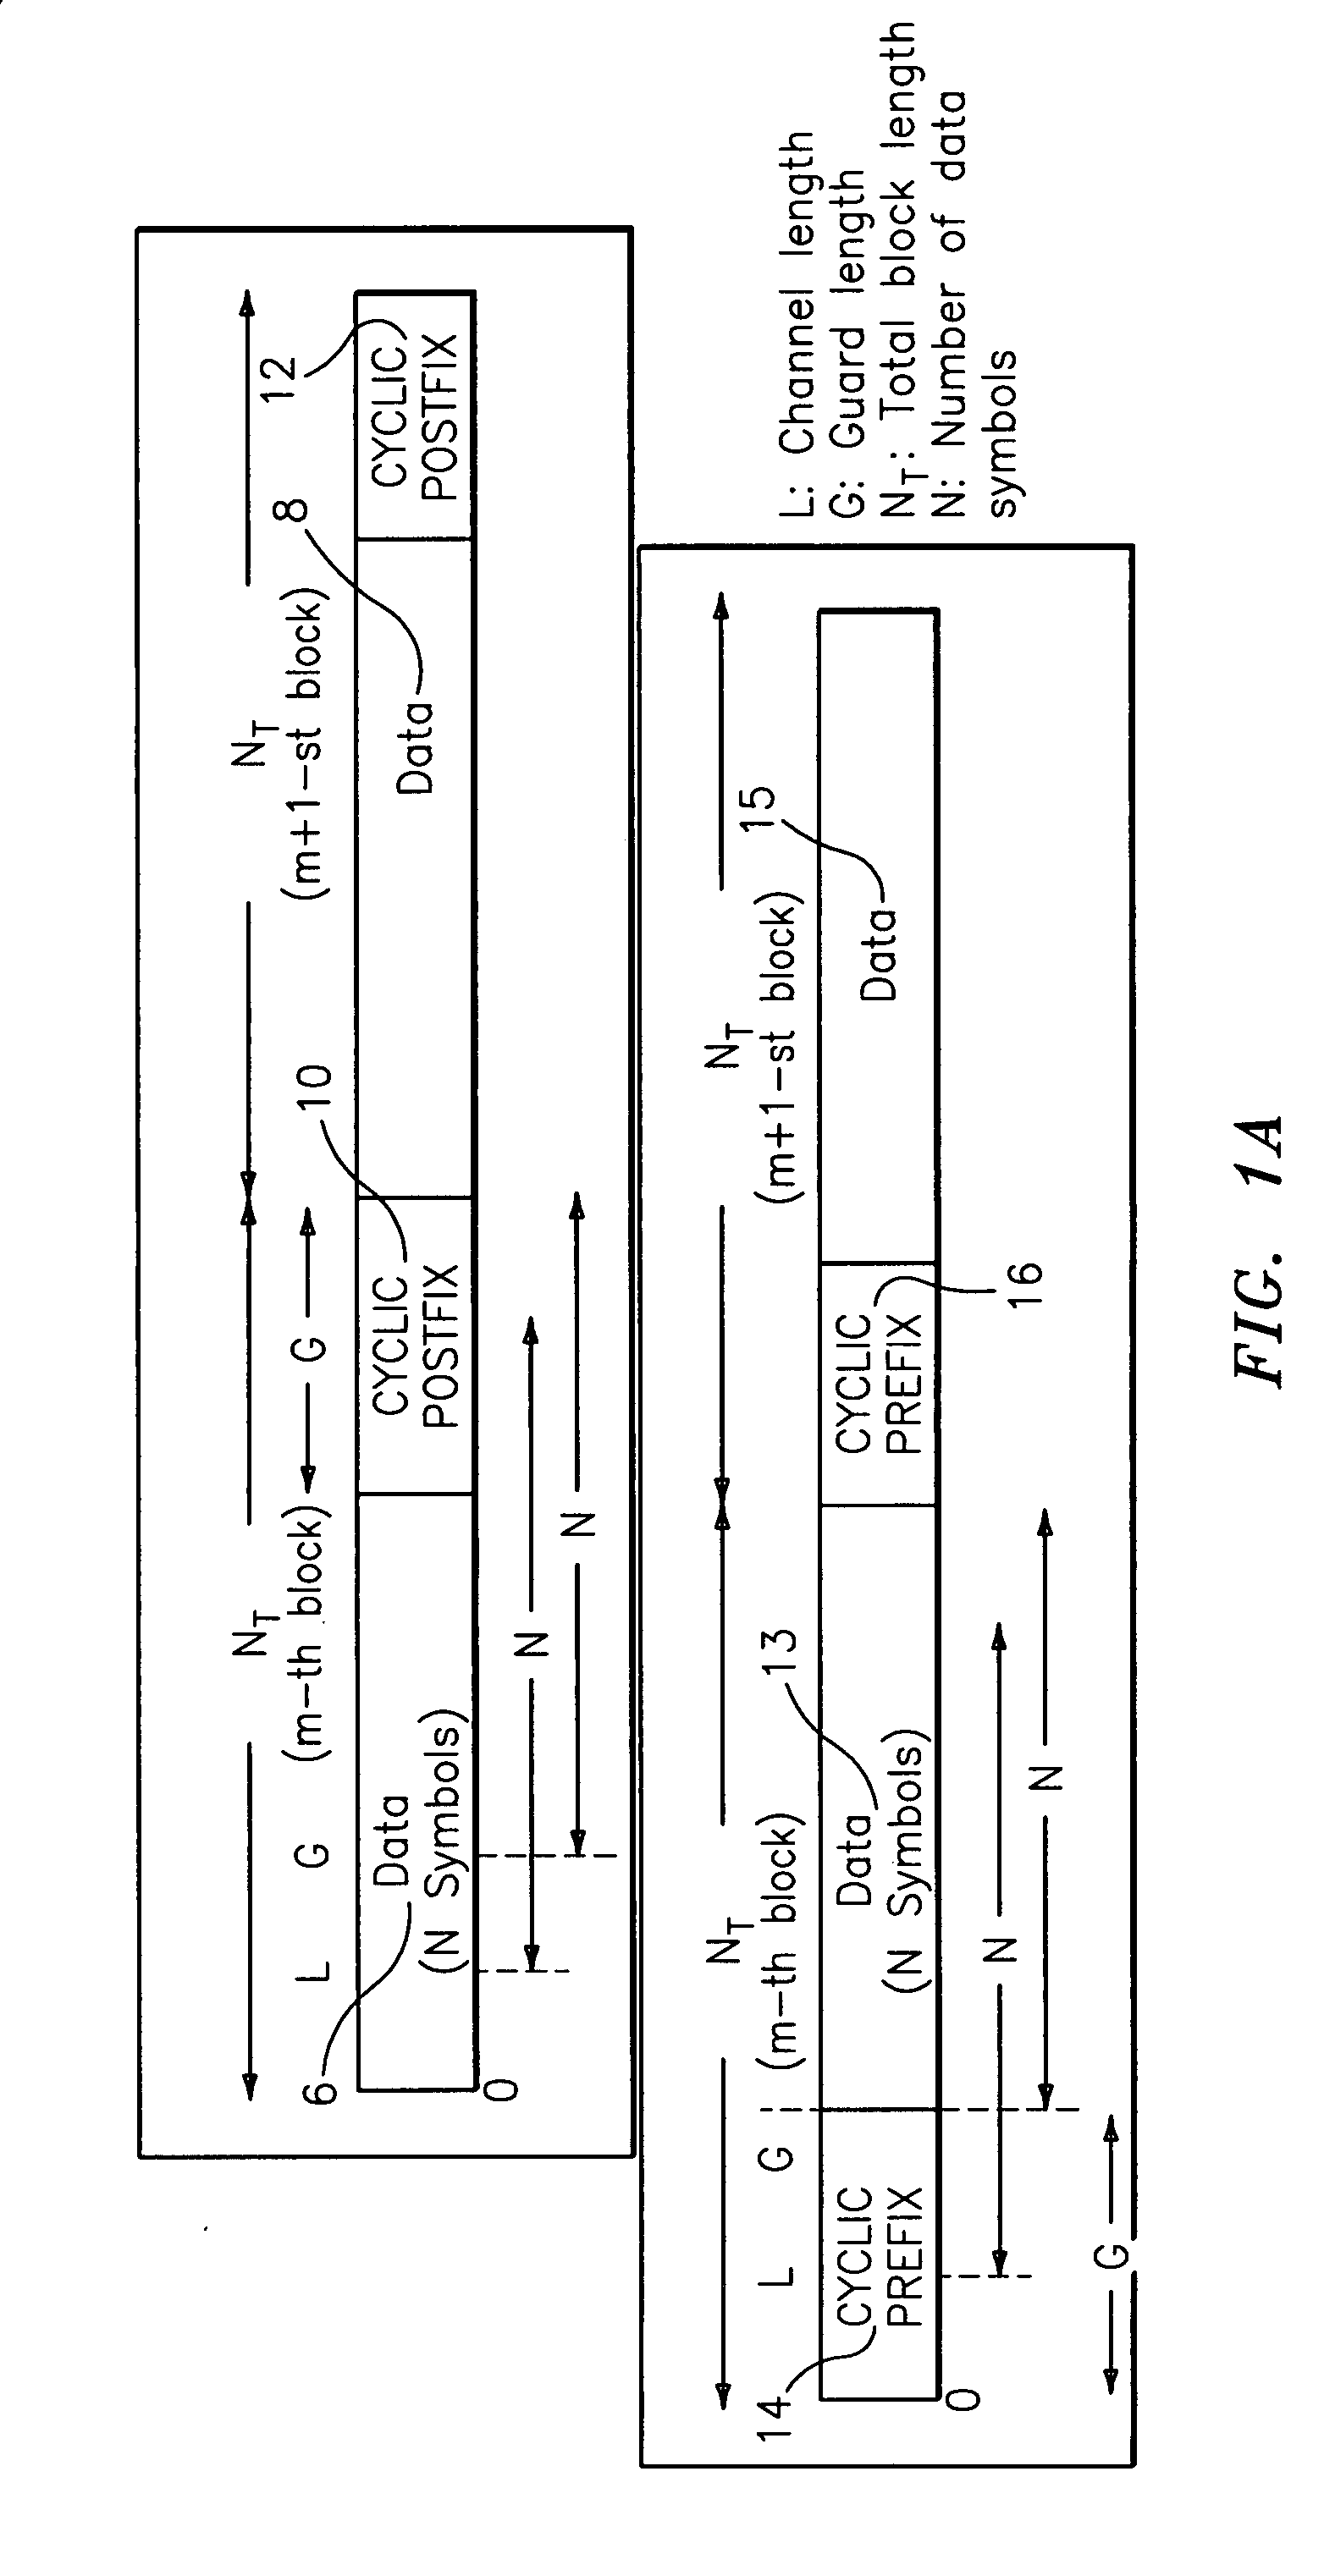 Low complexity method and apparatus to generate a symmetric-periodic continuous phase modulation (CPM) waveform